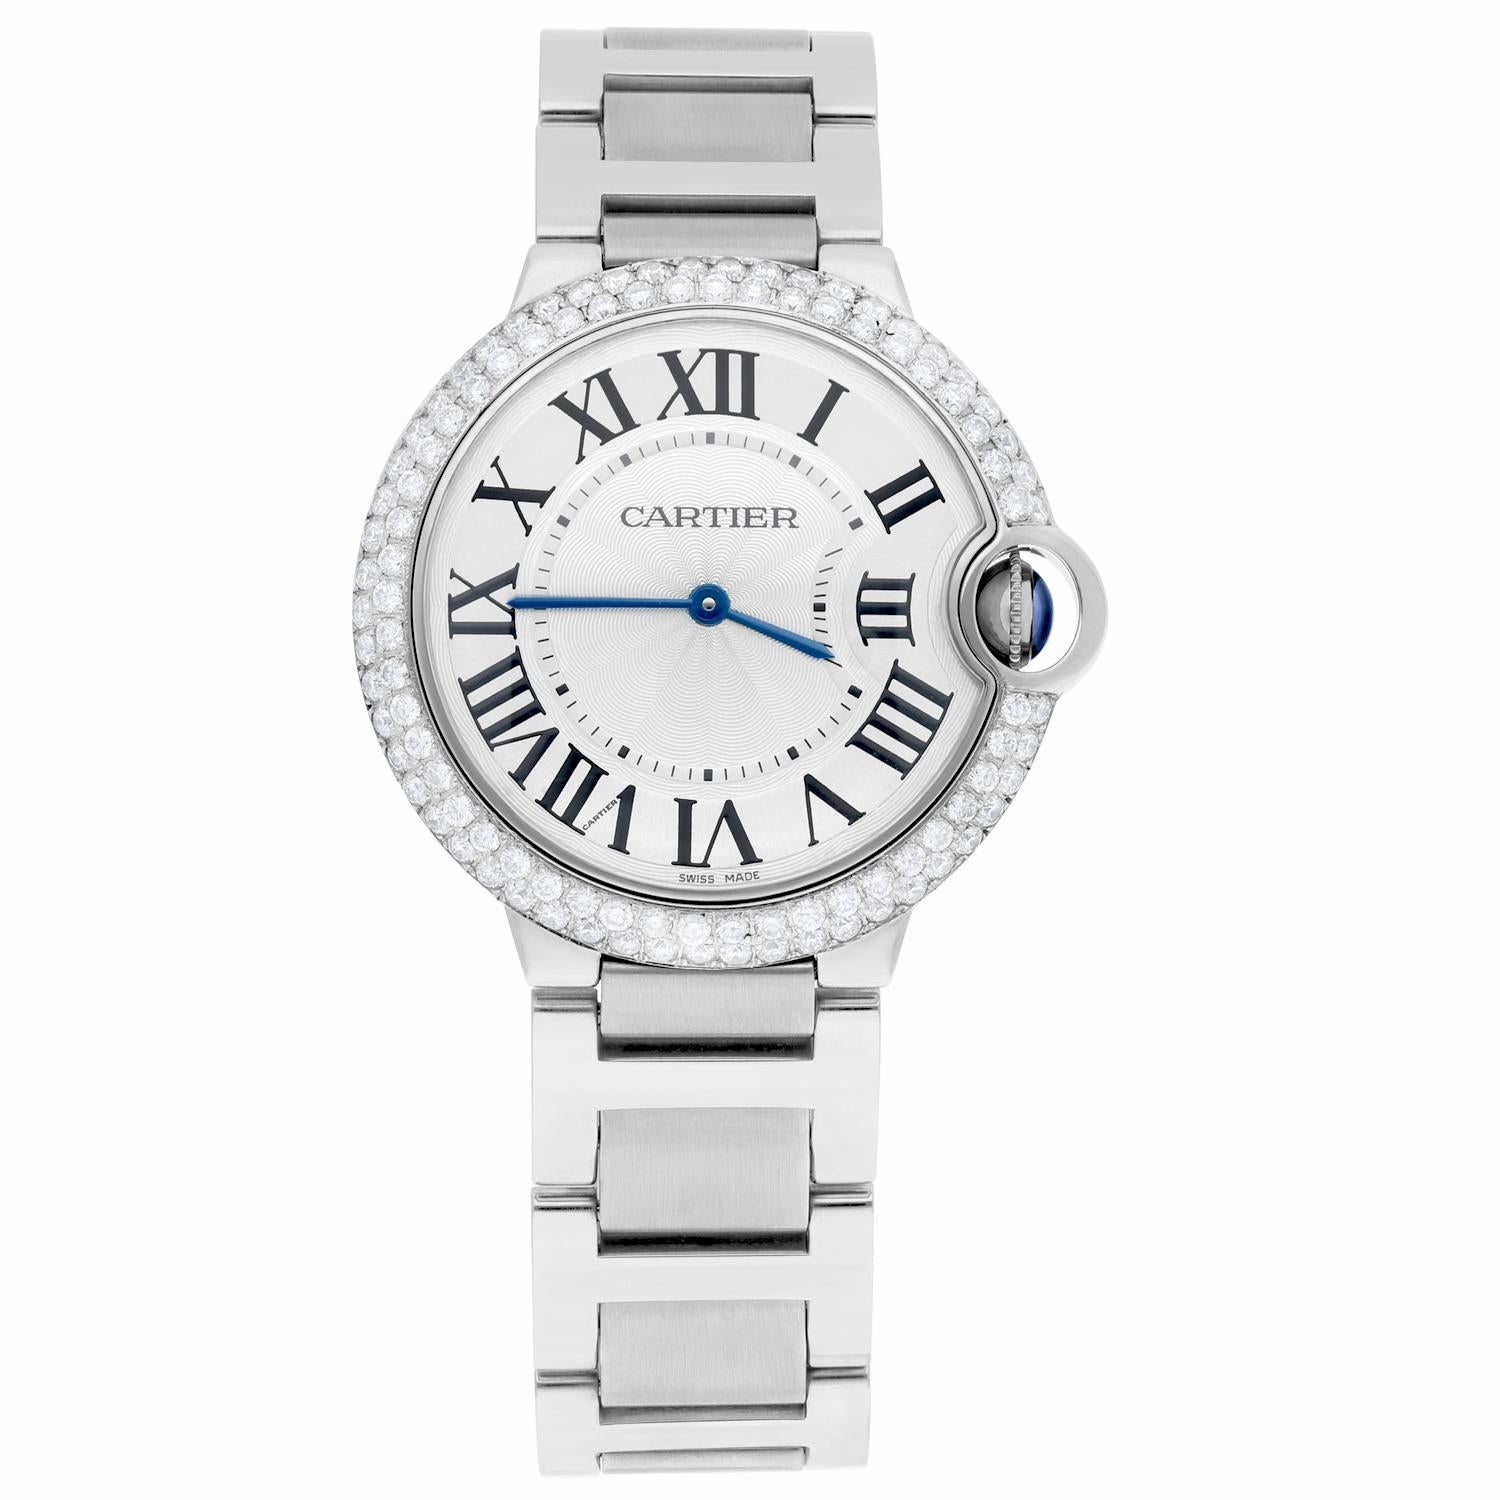 Brand: Cartier
Series: Ballon Bleu
Model: W69011Z4
Case Diameter: 36 mm
Bezel: Custom diamond set, 2Ct of Natural Diamonds
Dial: Silver Dial
The sale includes a Cartier box and an appraisal certificate which states the watch's credentials
Attached